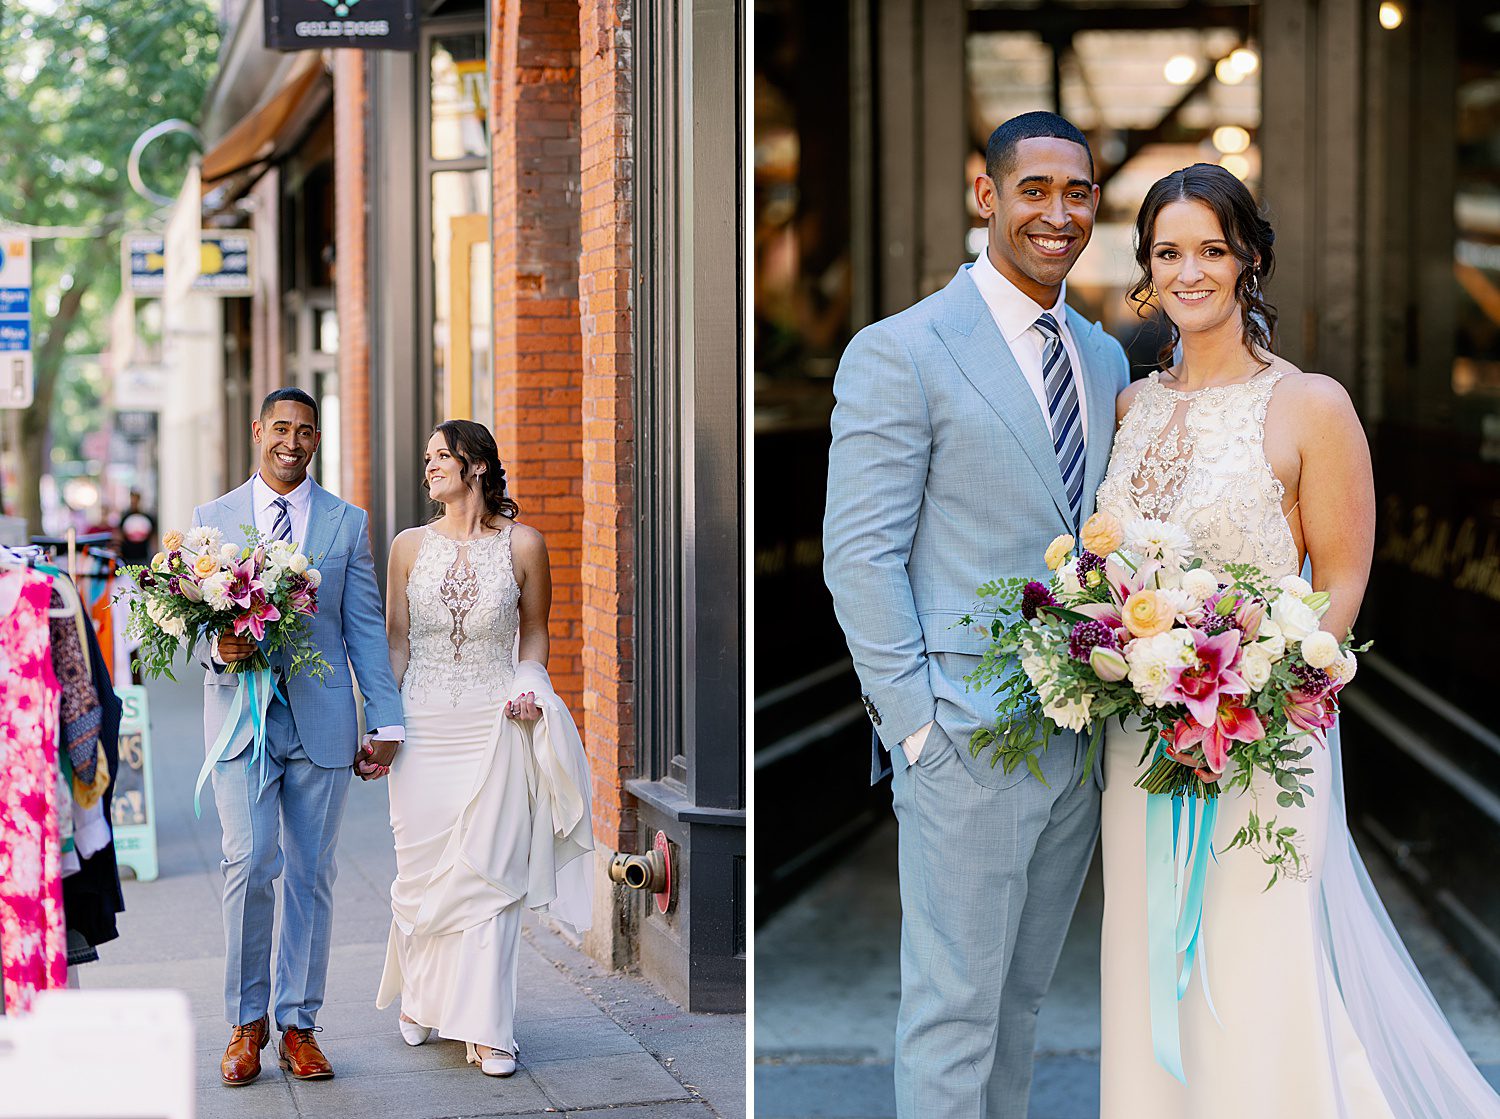 bride and groom walking in the Ballard neighborhood of Seattle holding a colorful bridal bouquet